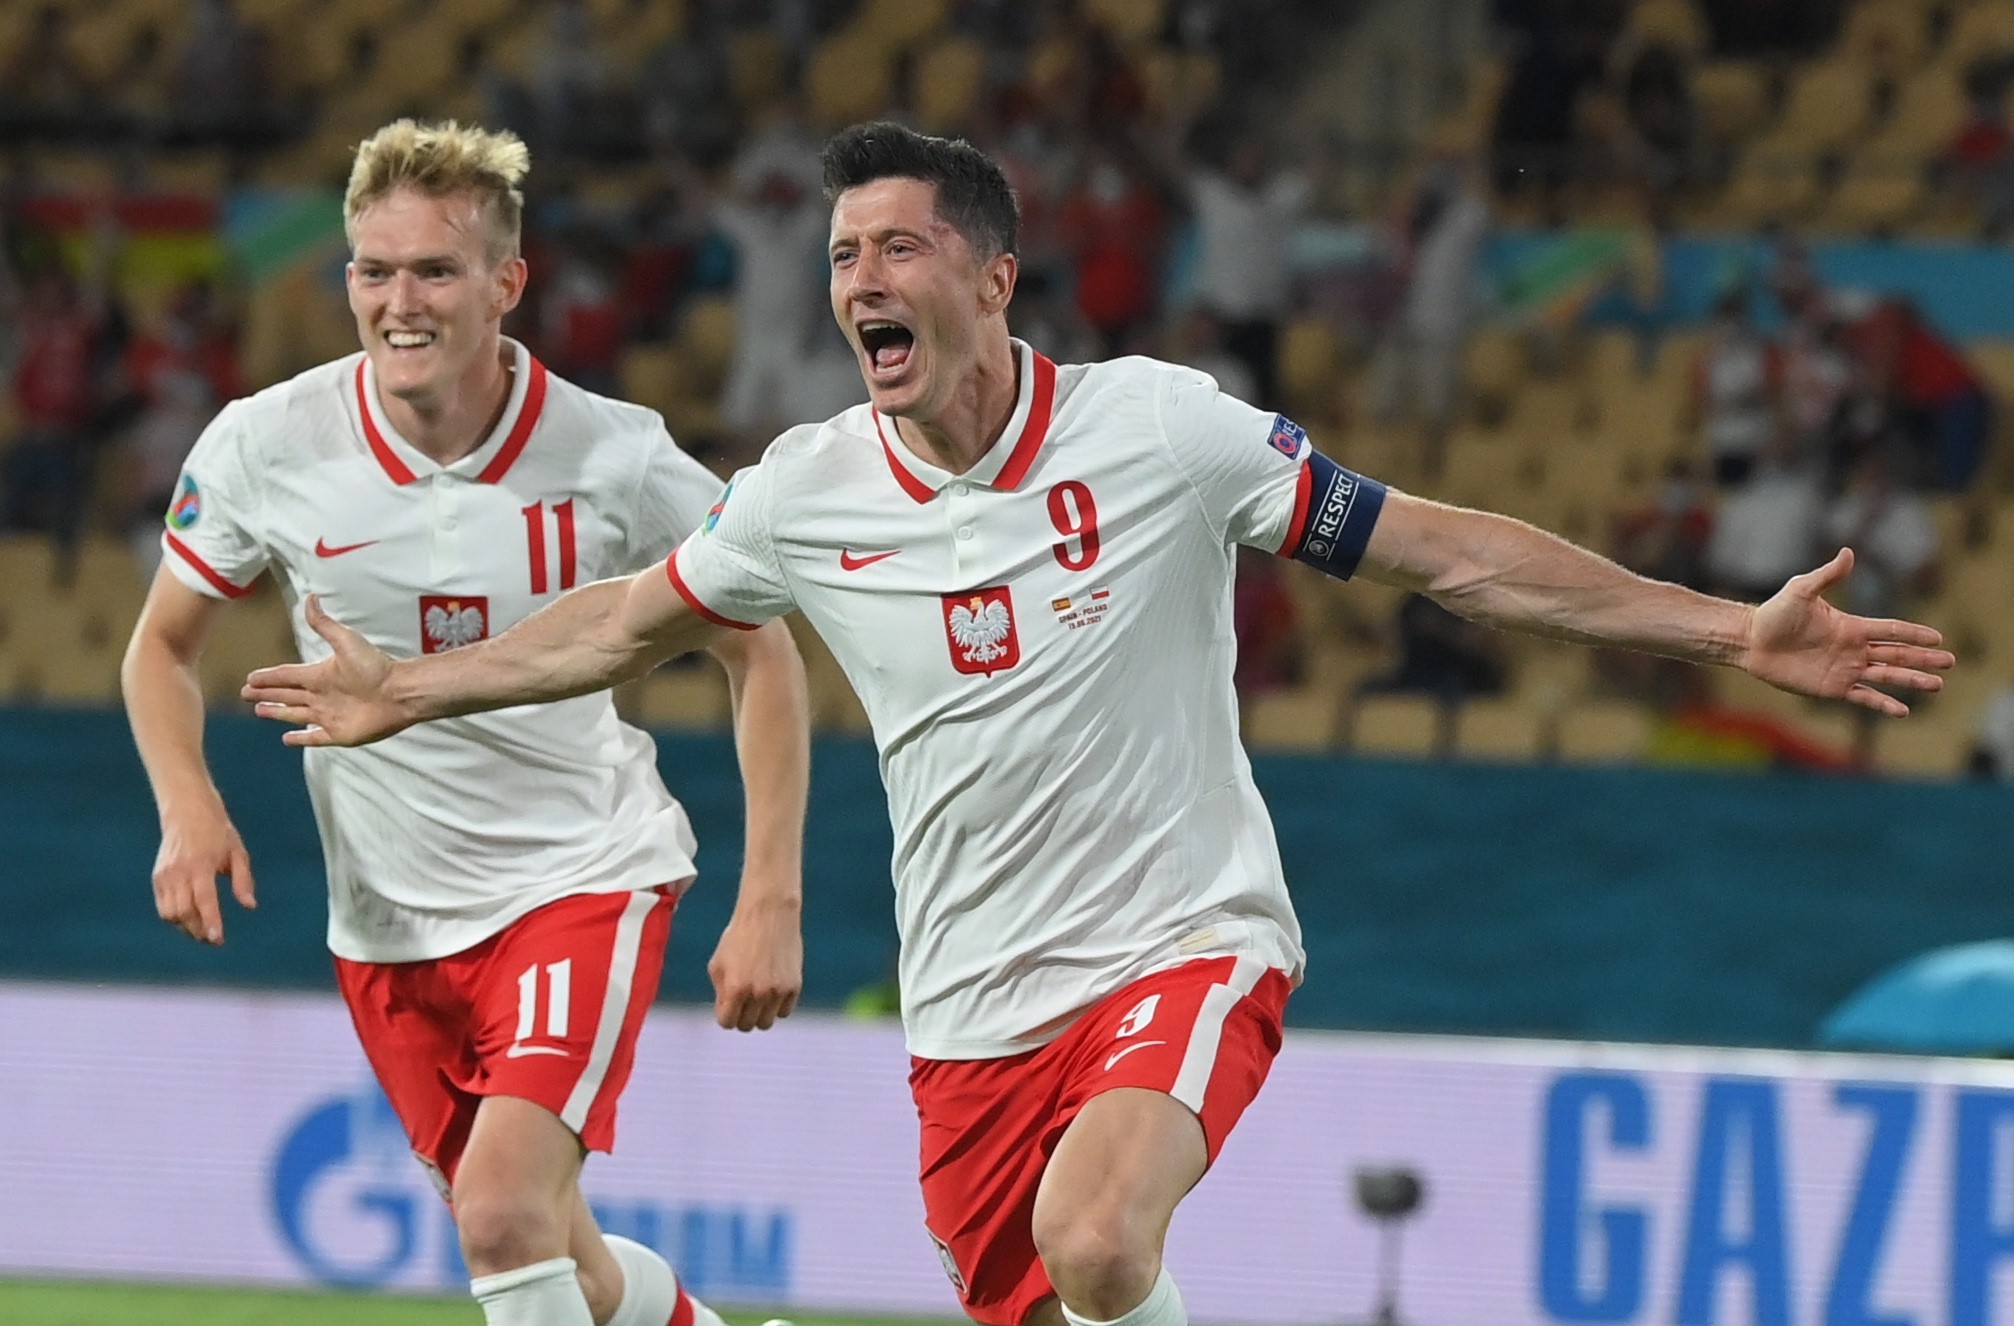 epa09286994 Robert Lewandowski (R) of Poland celebrates with team-mate Karol Swiderski after scoring the 1-1 goal during the UEFA EURO 2020 group E preliminary round soccer match between Spain and Poland in Seville, Spain, 19 June 2021.  EPA/David Ramos / POOL (RESTRICTIONS: For editorial news reporting purposes only. Images must appear as still images and must not emulate match action video footage. Photographs published in online publications shall have an interval of at least 20 seconds between the posting.)